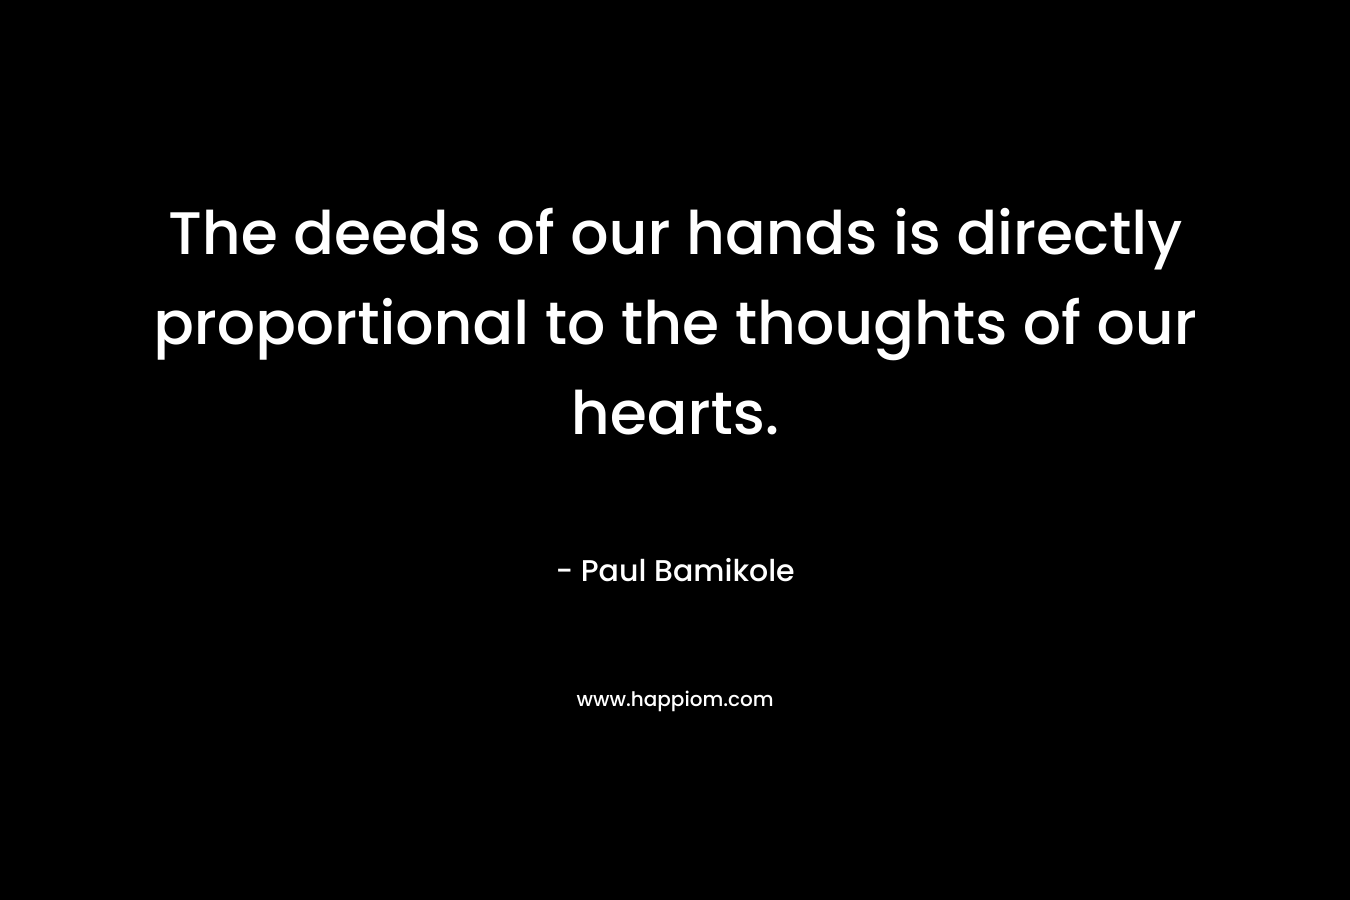 The deeds of our hands is directly proportional to the thoughts of our hearts.